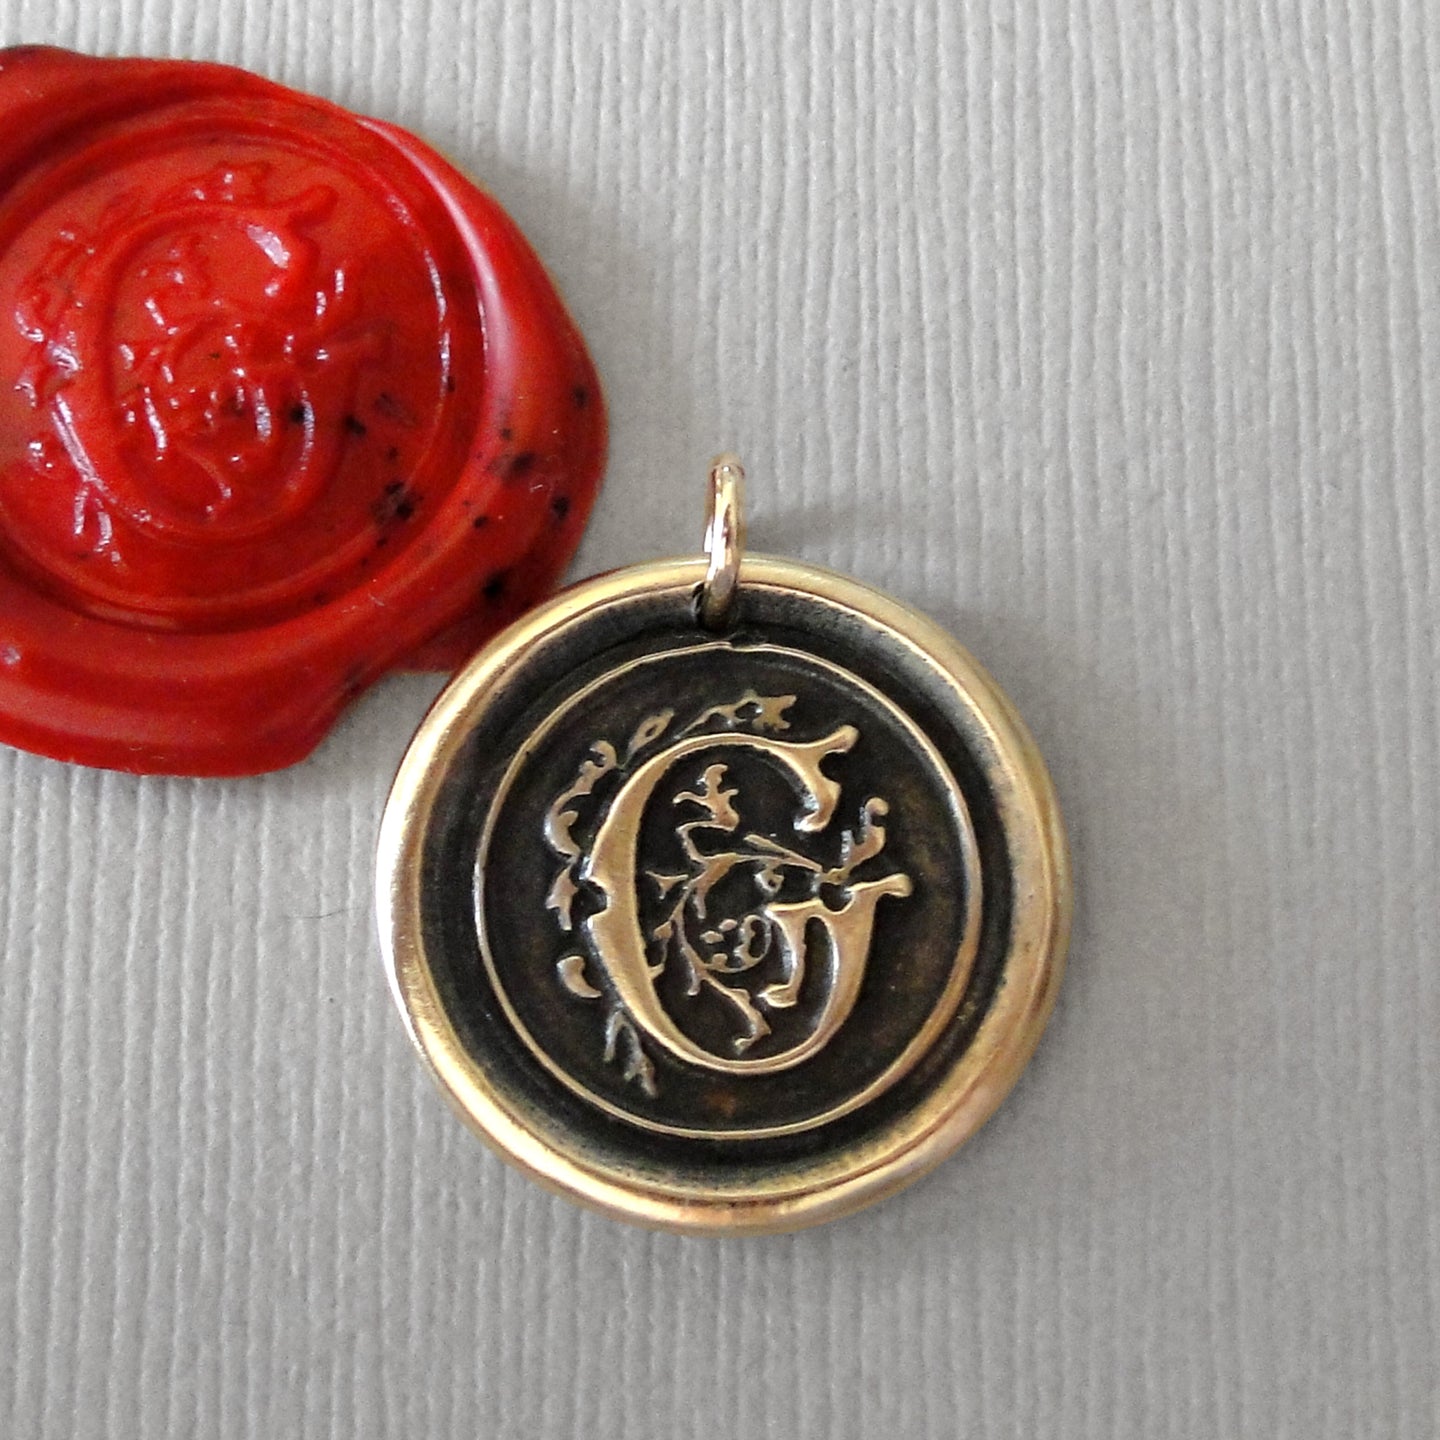 Wax Seal Charm Initial G - wax seal jewelry pendant alphabet charms Letter G